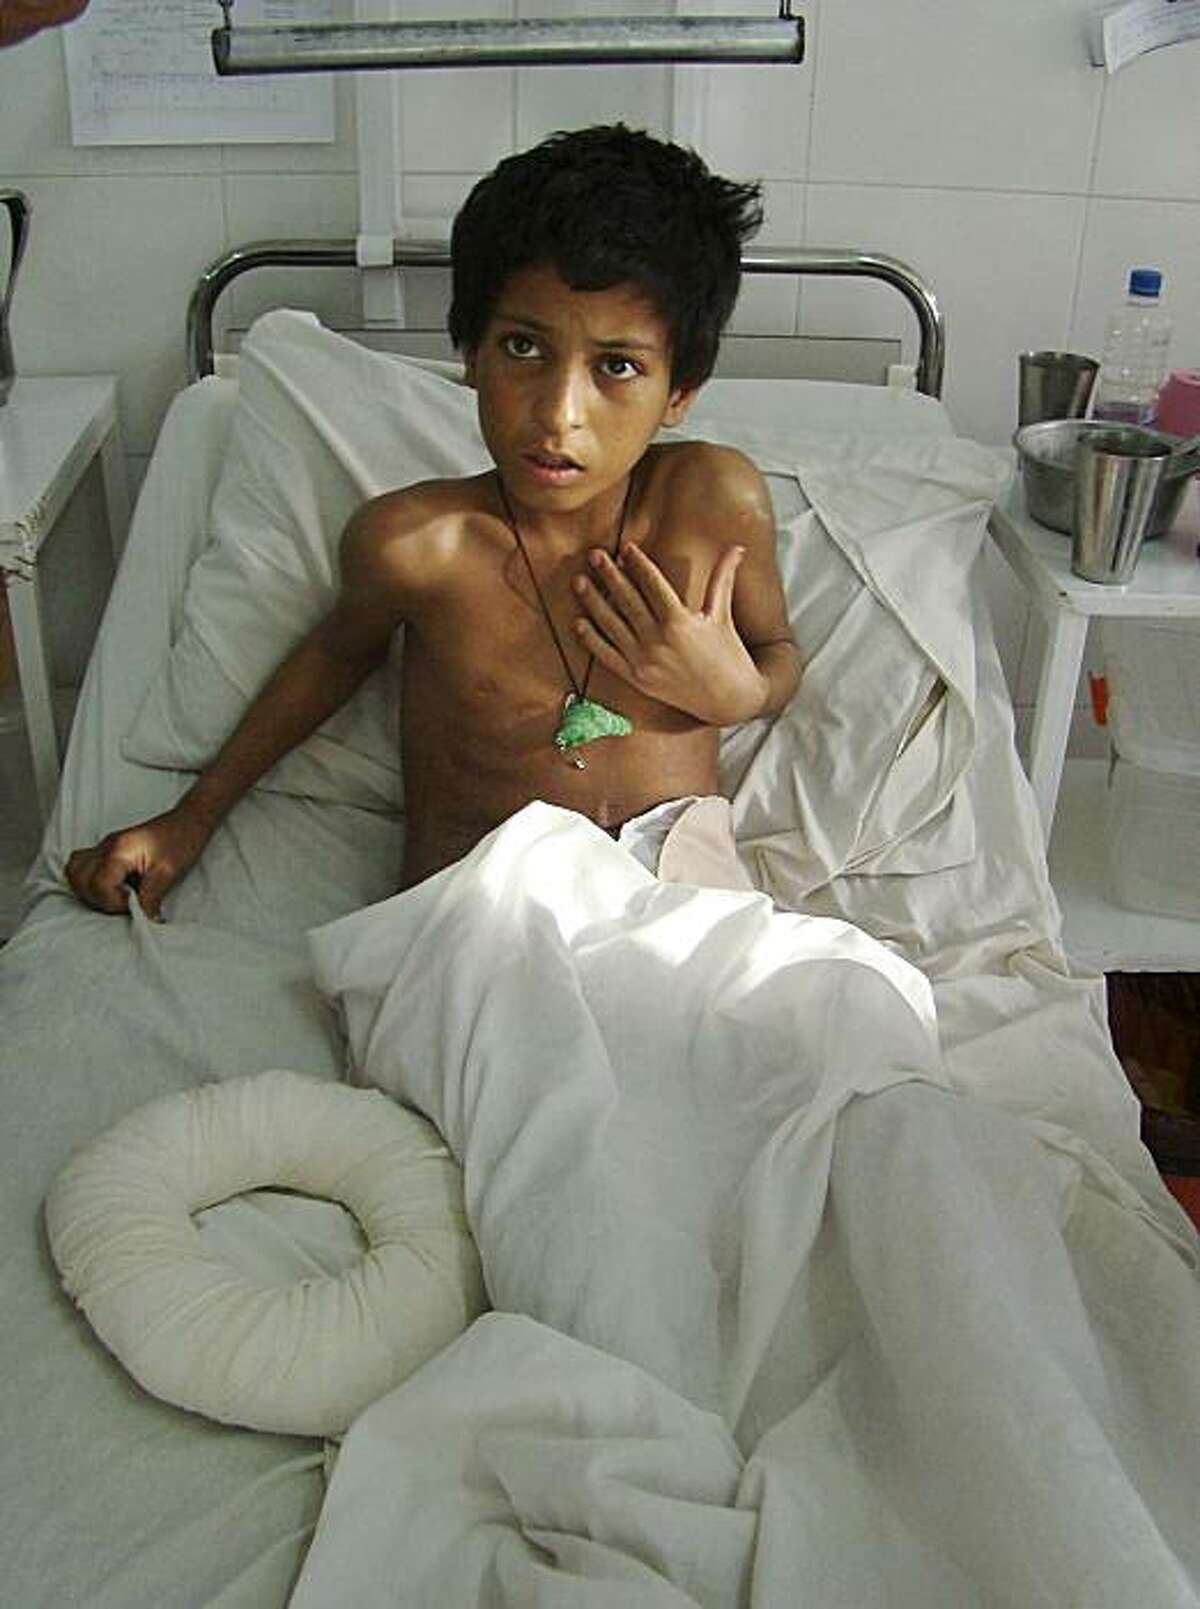 Abdul Hamid, 12, recuperates from his injuries at an Italian charitable hospital in Lashkar Gah, Helmand province, southern Afghanistan, Wednesday, Feb. 24, 2010. At the whitewashed Italian-run Emergency Hospital in Helmand's dusty provincial capital of Lashkar Gah, most of the civilian wounded recuperating from the Marjah battlefield said their injuries were caused by "the foreign soldiers," a claim that could hurt U.S. efforts to win Afghan hearts and minds.